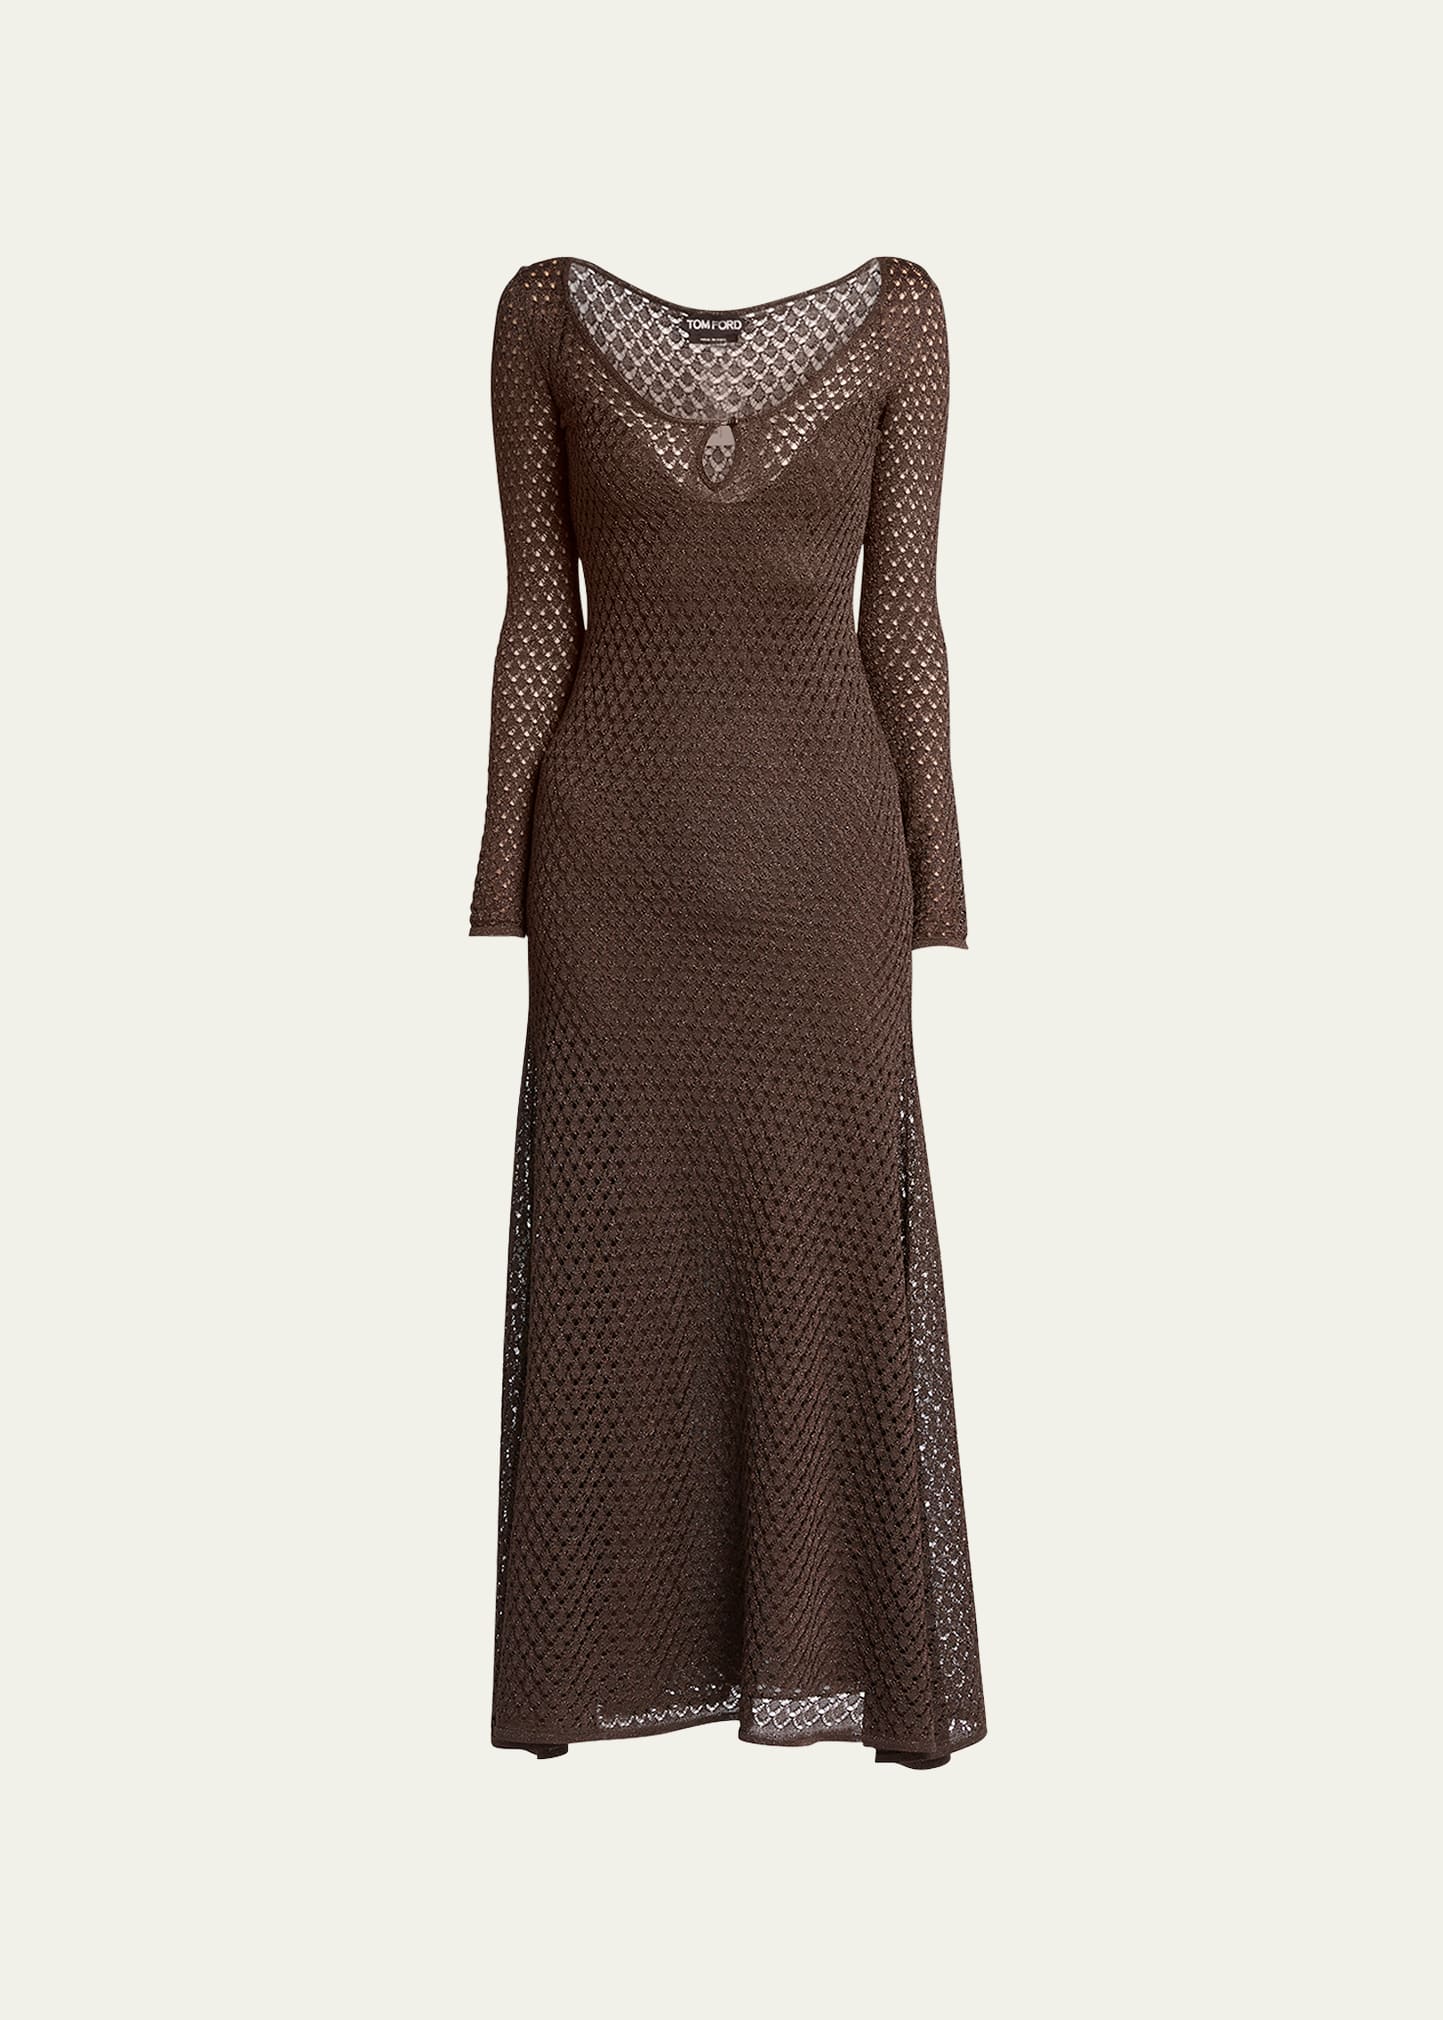 Tom Ford Open Weave Knit Midi Dress In Chocolate